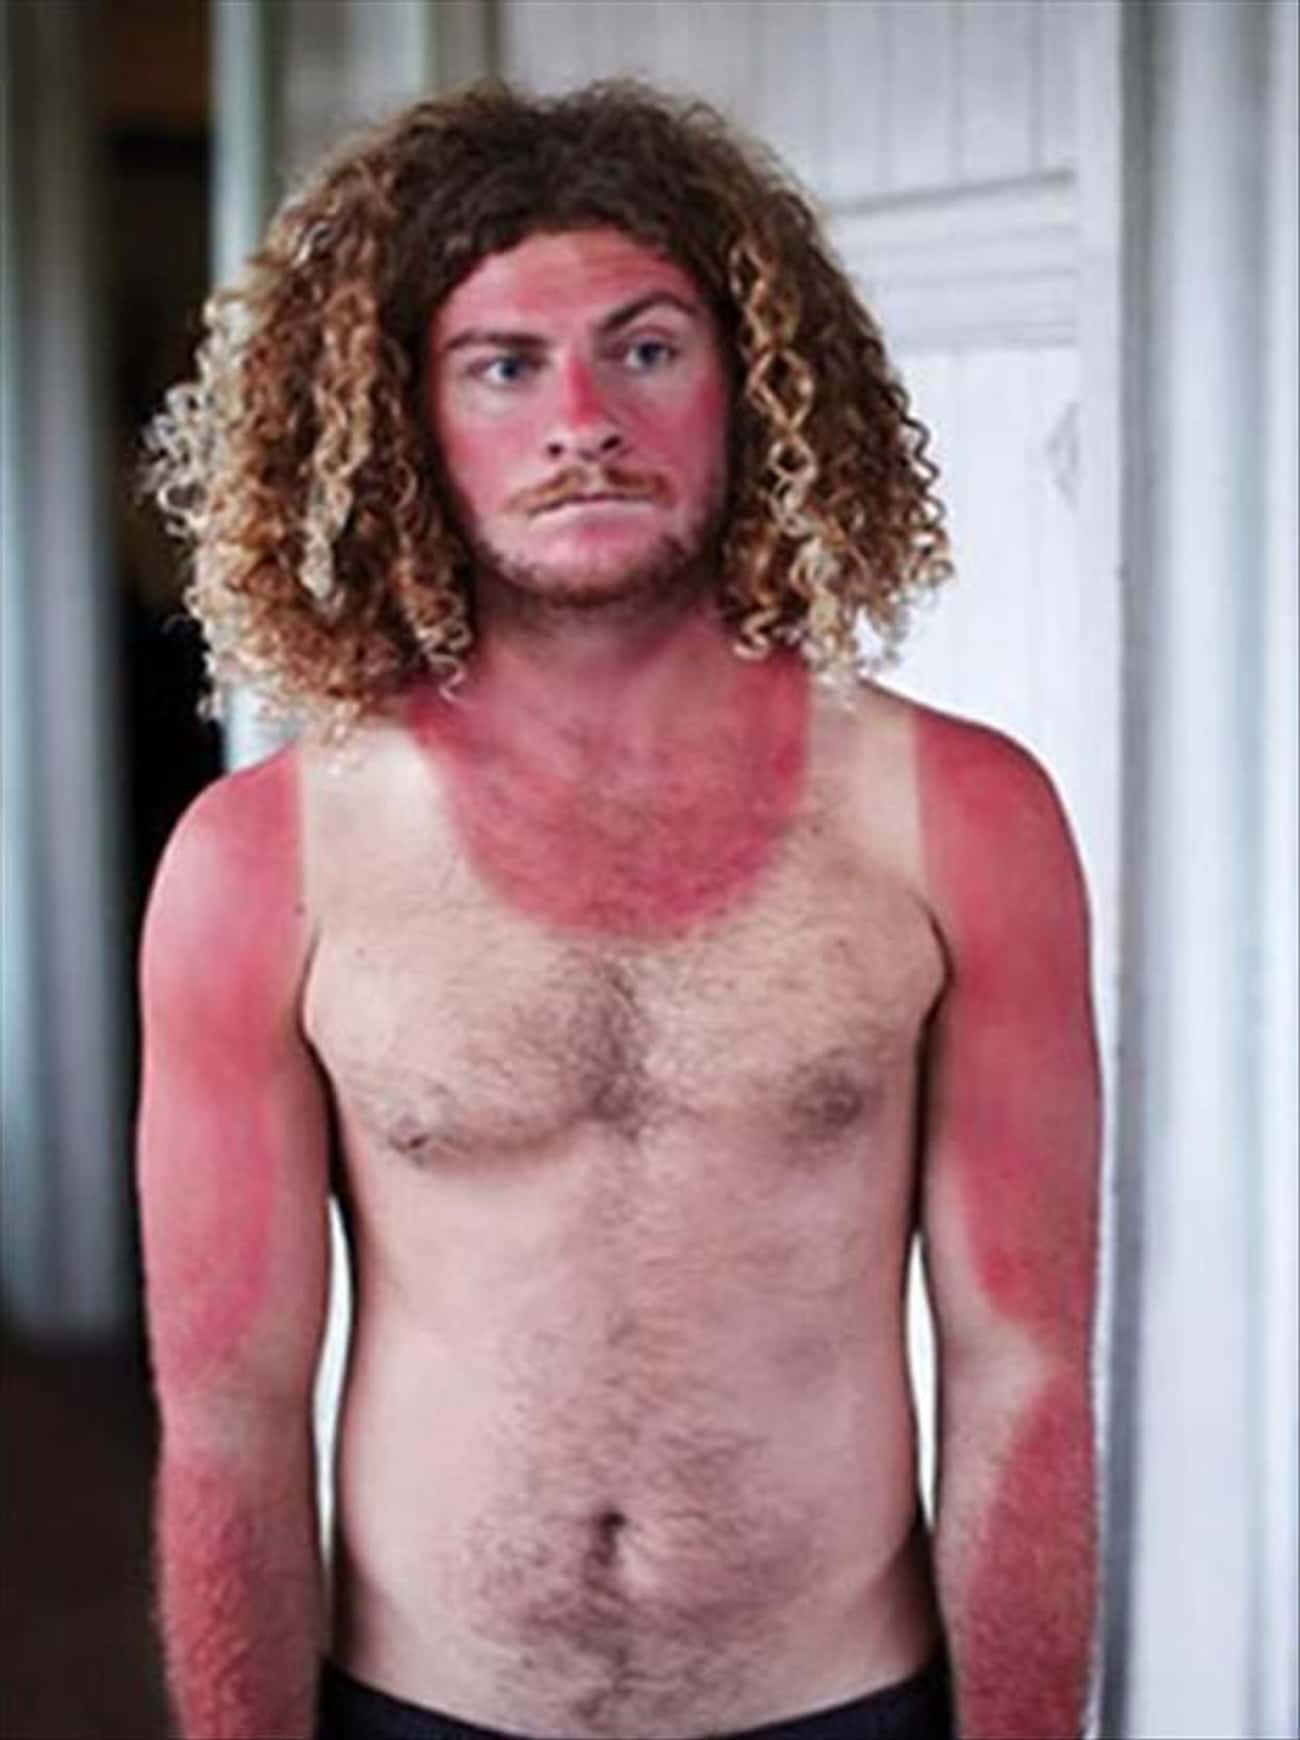 This Lobster With The Tanktop Made Of Human Skin